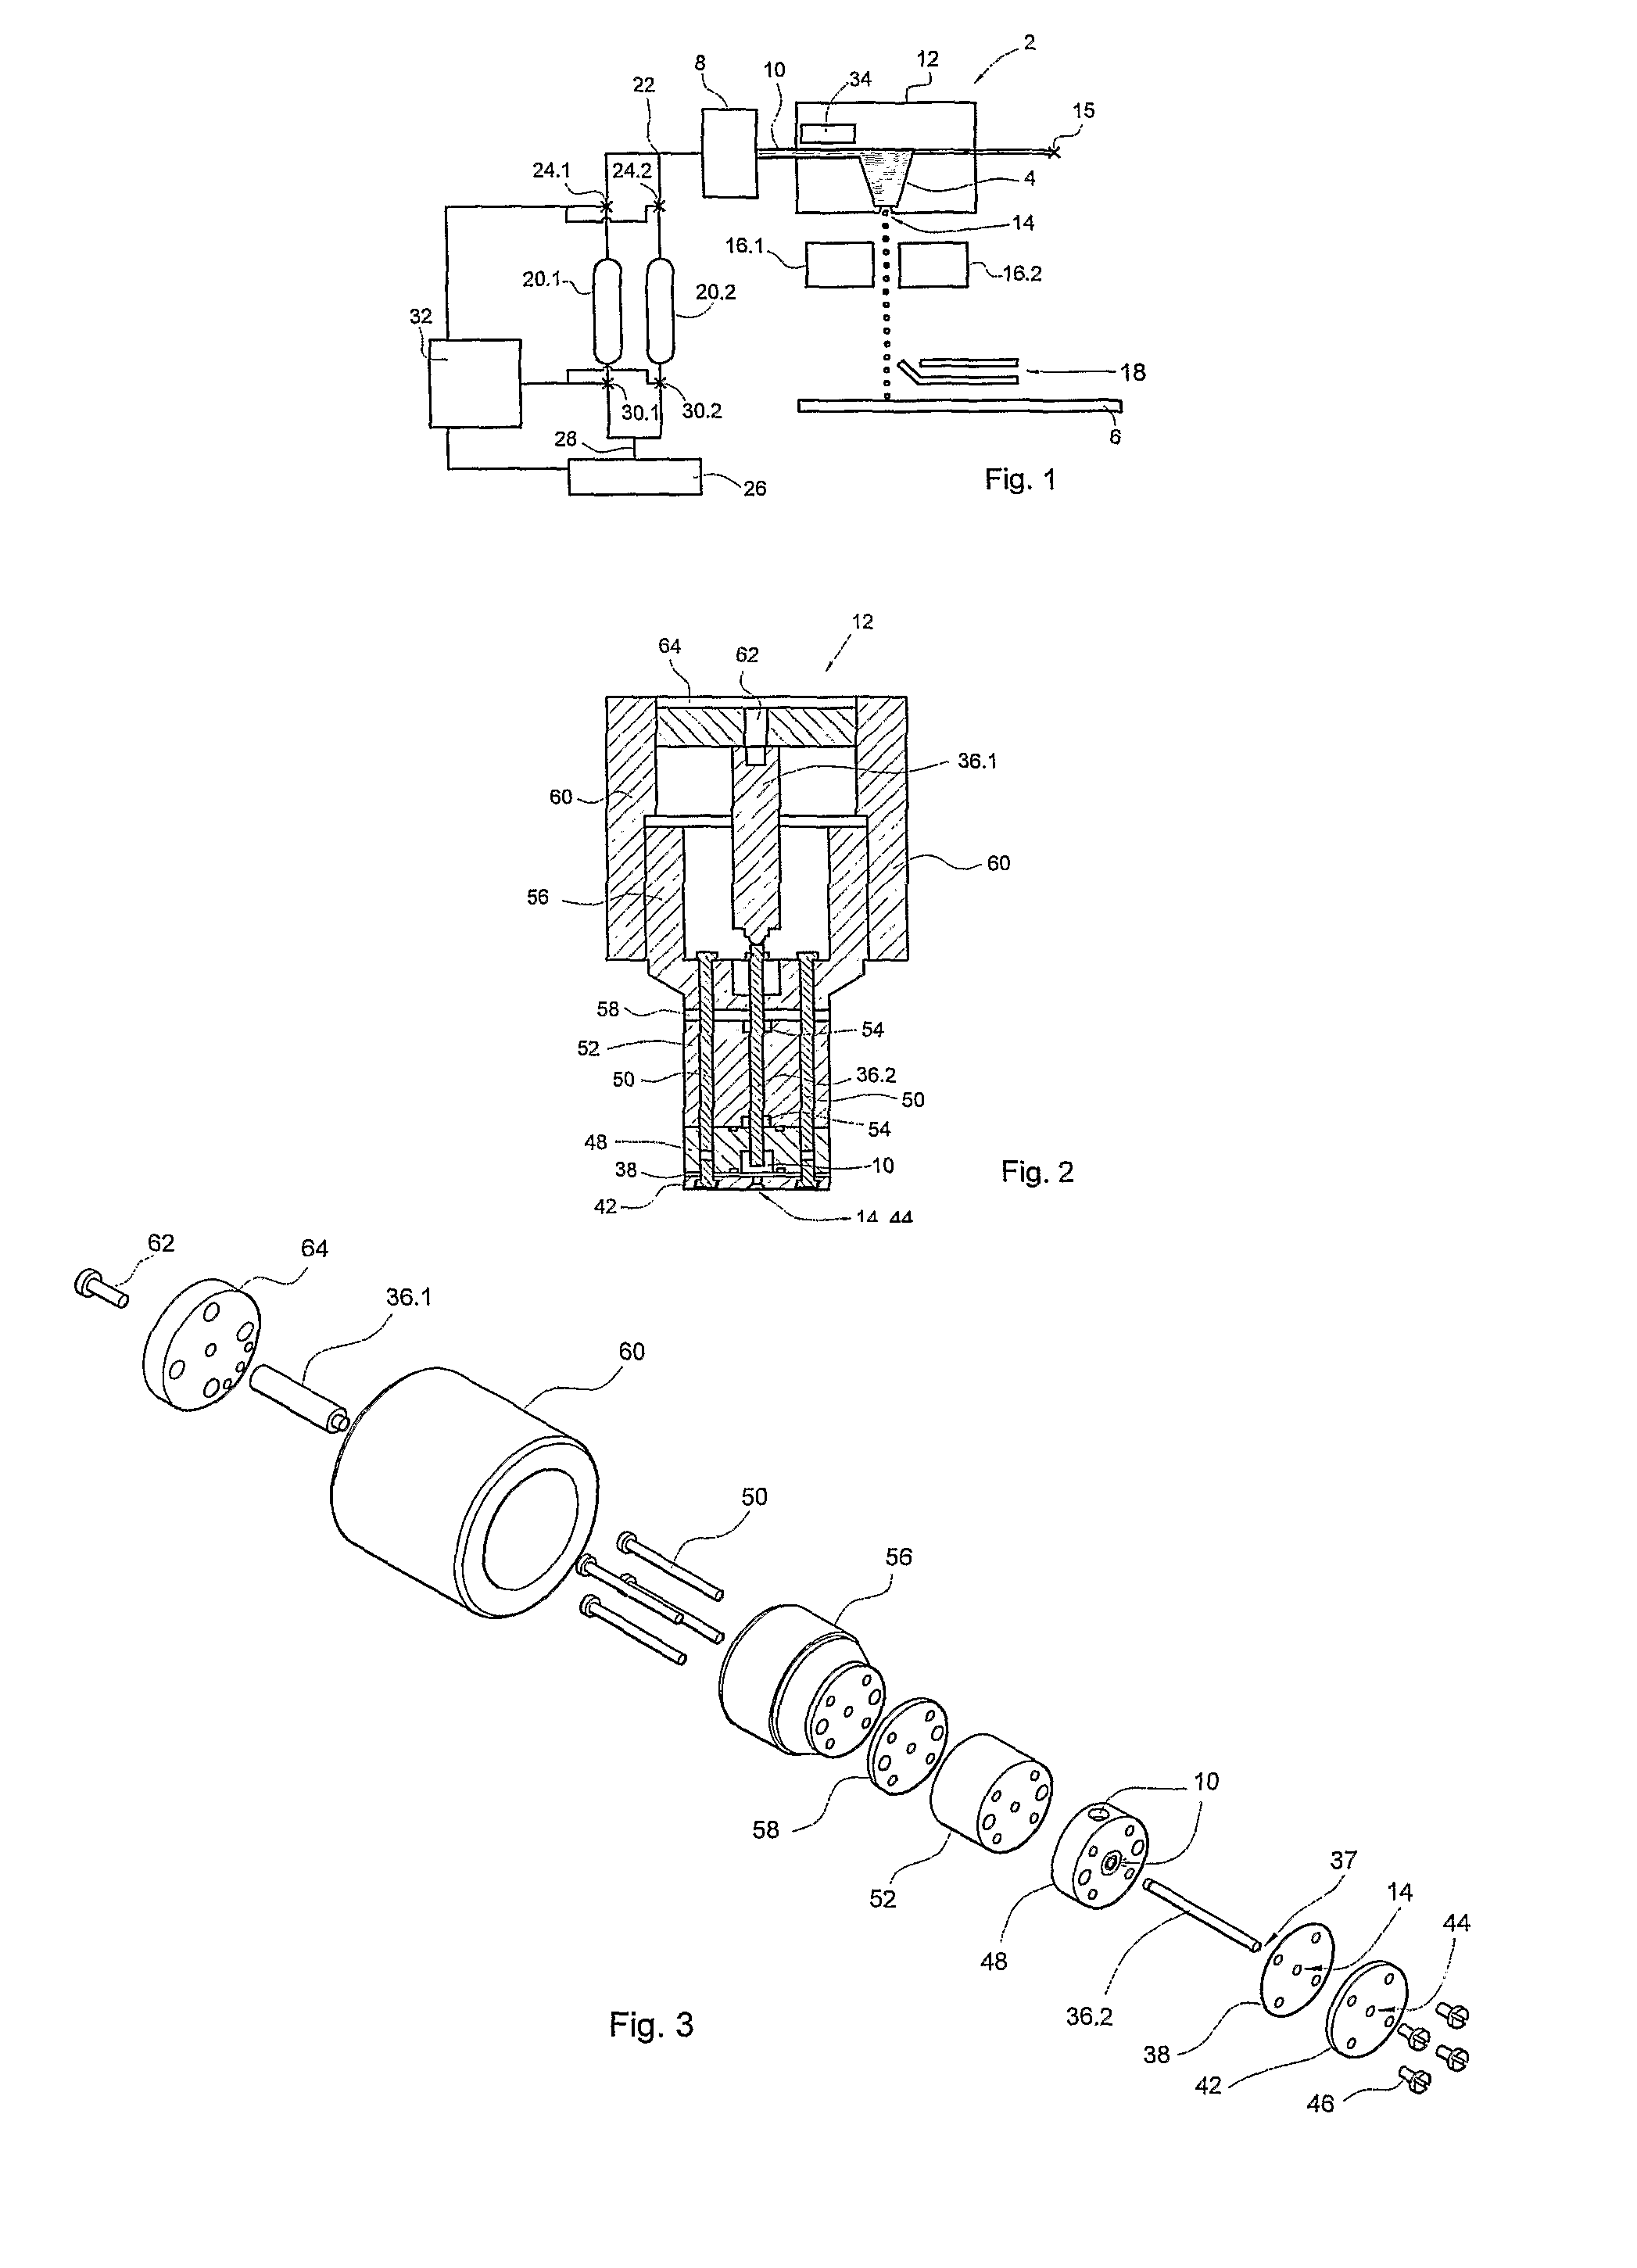 Method of printing a fluid material using a continuous jet printing technique and curable compositions for use in said method